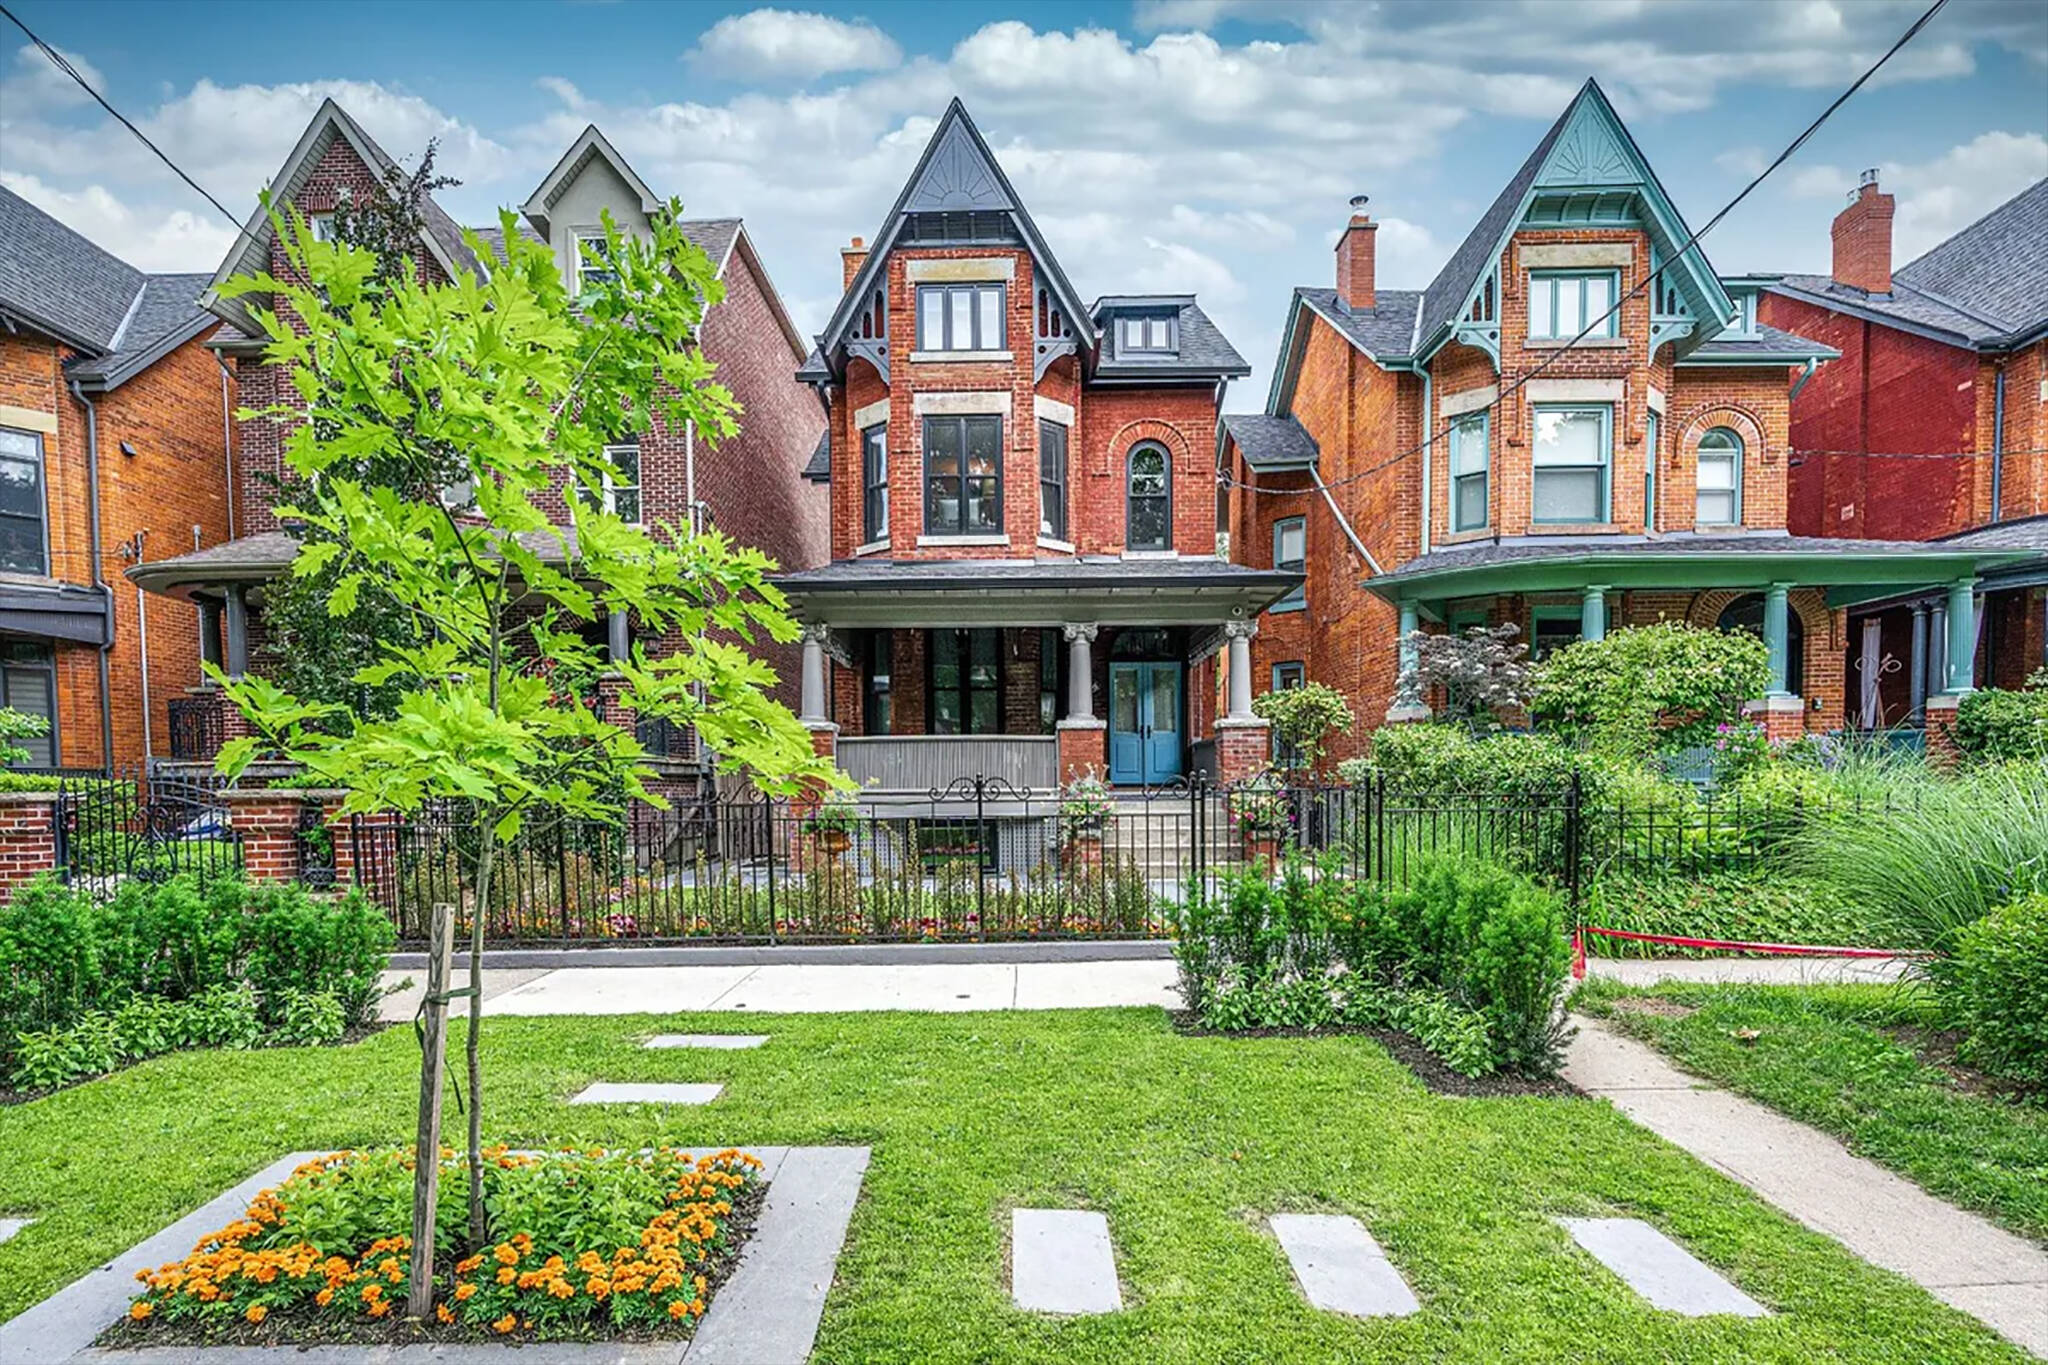 Toronto homeowners pay the lowest property tax rates in all of Ontario